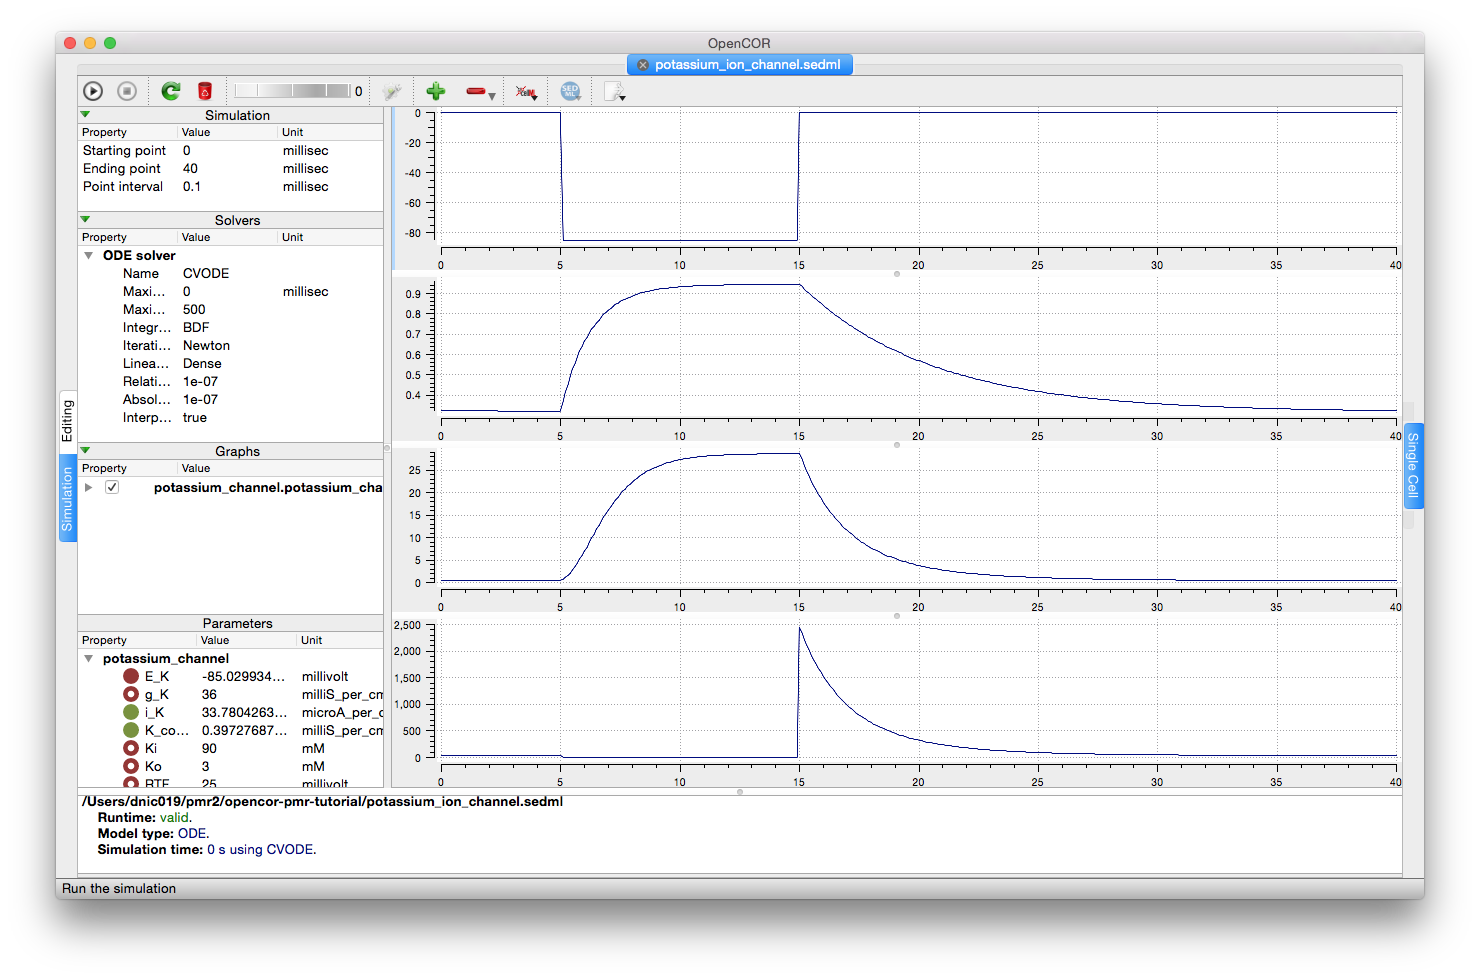 Screenshot illustrating the results of executing this potassium simulation experiment in OpenCOR.